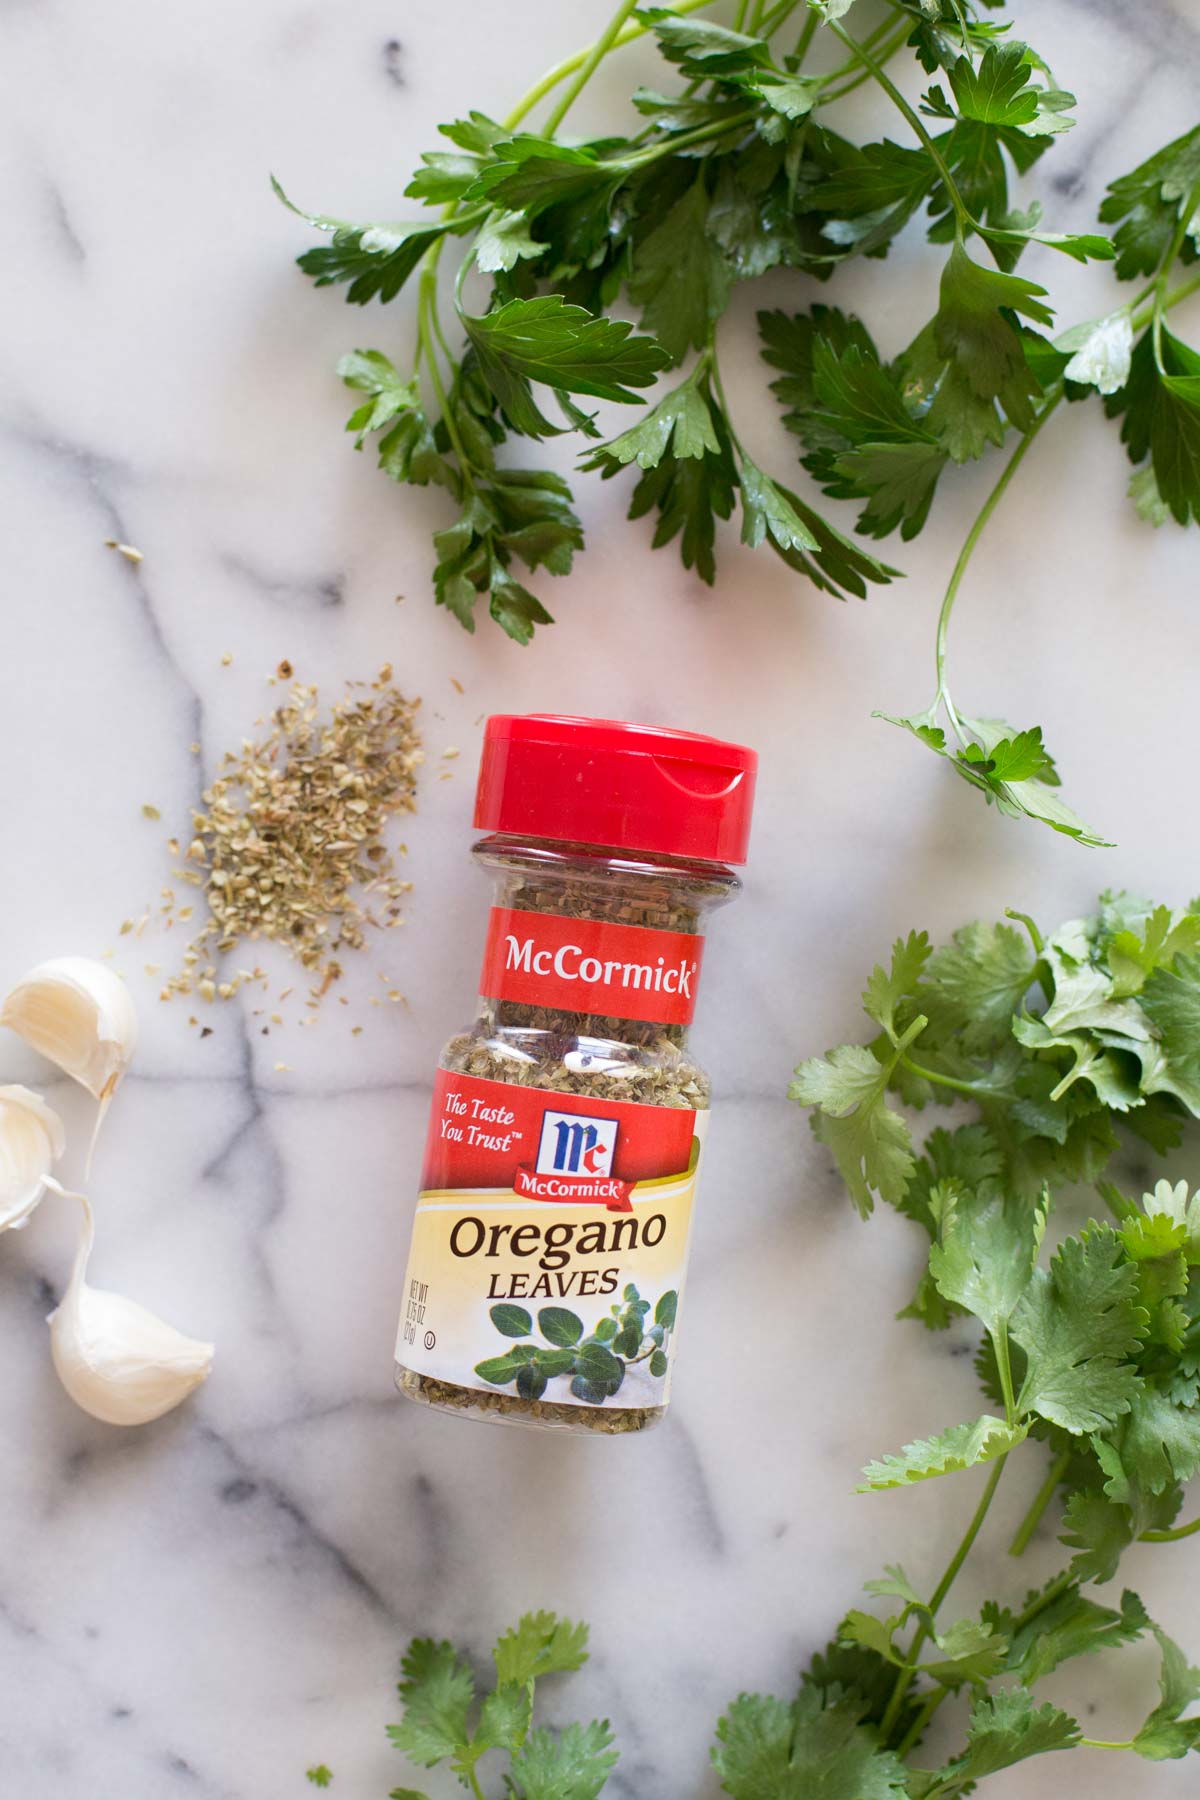 A spice container of McCormick Oregano Leaves, fresh parsley, cilantro, and garlic for the chimichurri.